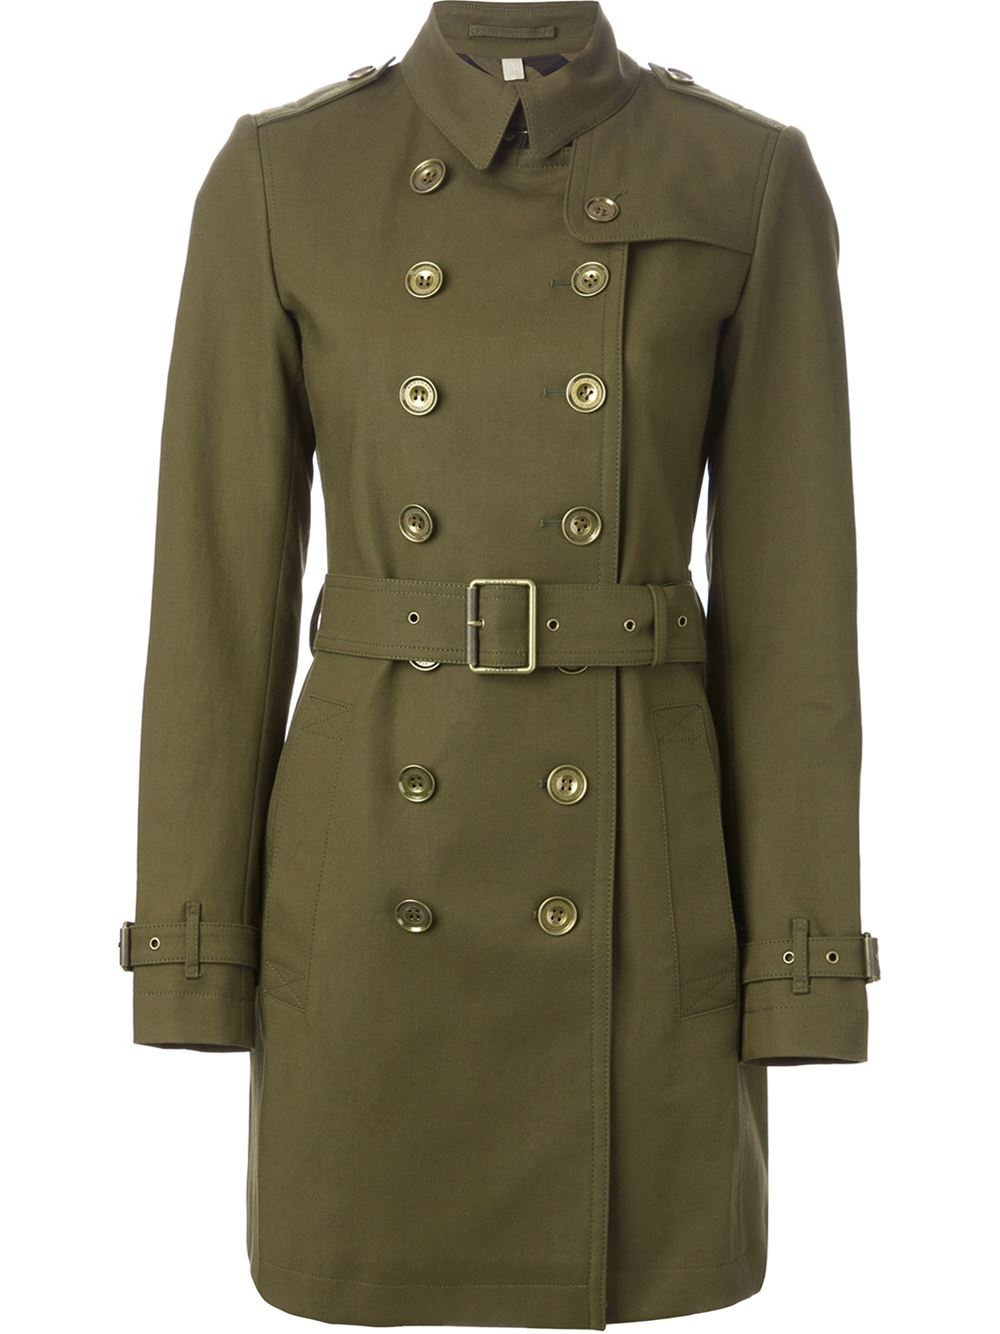 Lyst - Burberry Military Trench Coat in Green